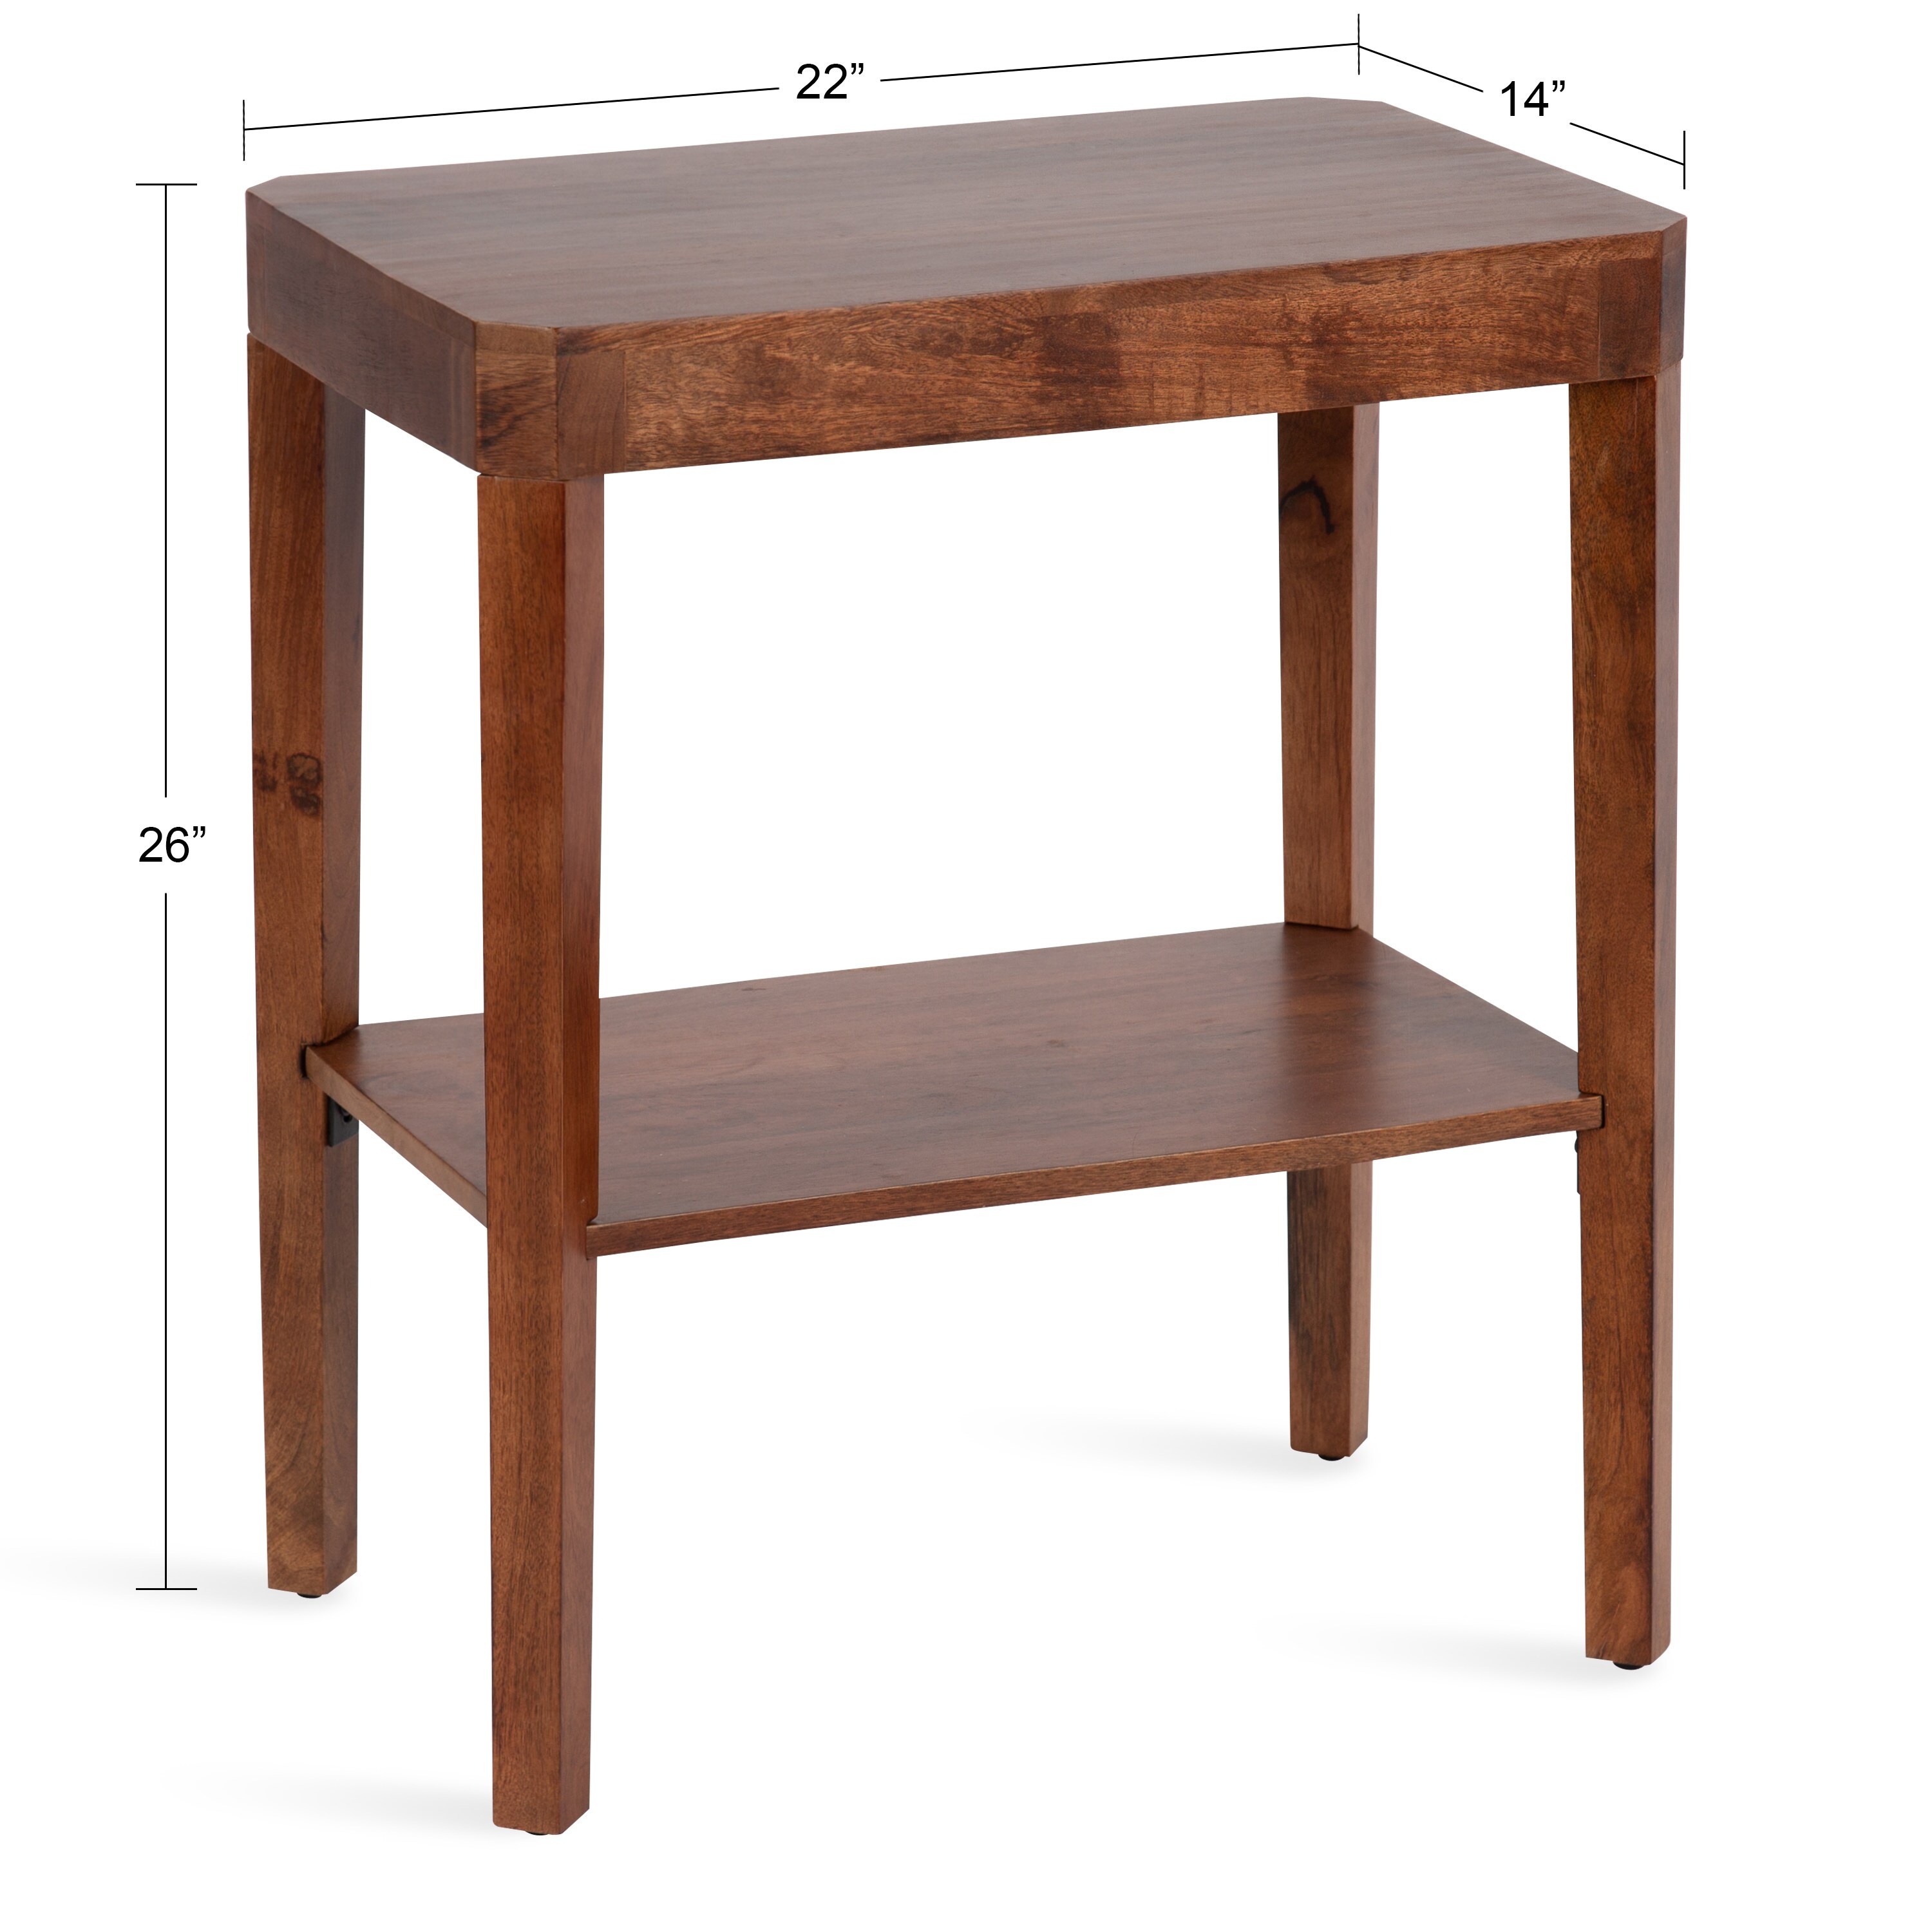 22 x 14 x 26 Farmhouse End Table for Display and Storage White Kate and Laurel Travere Rustic Side Table